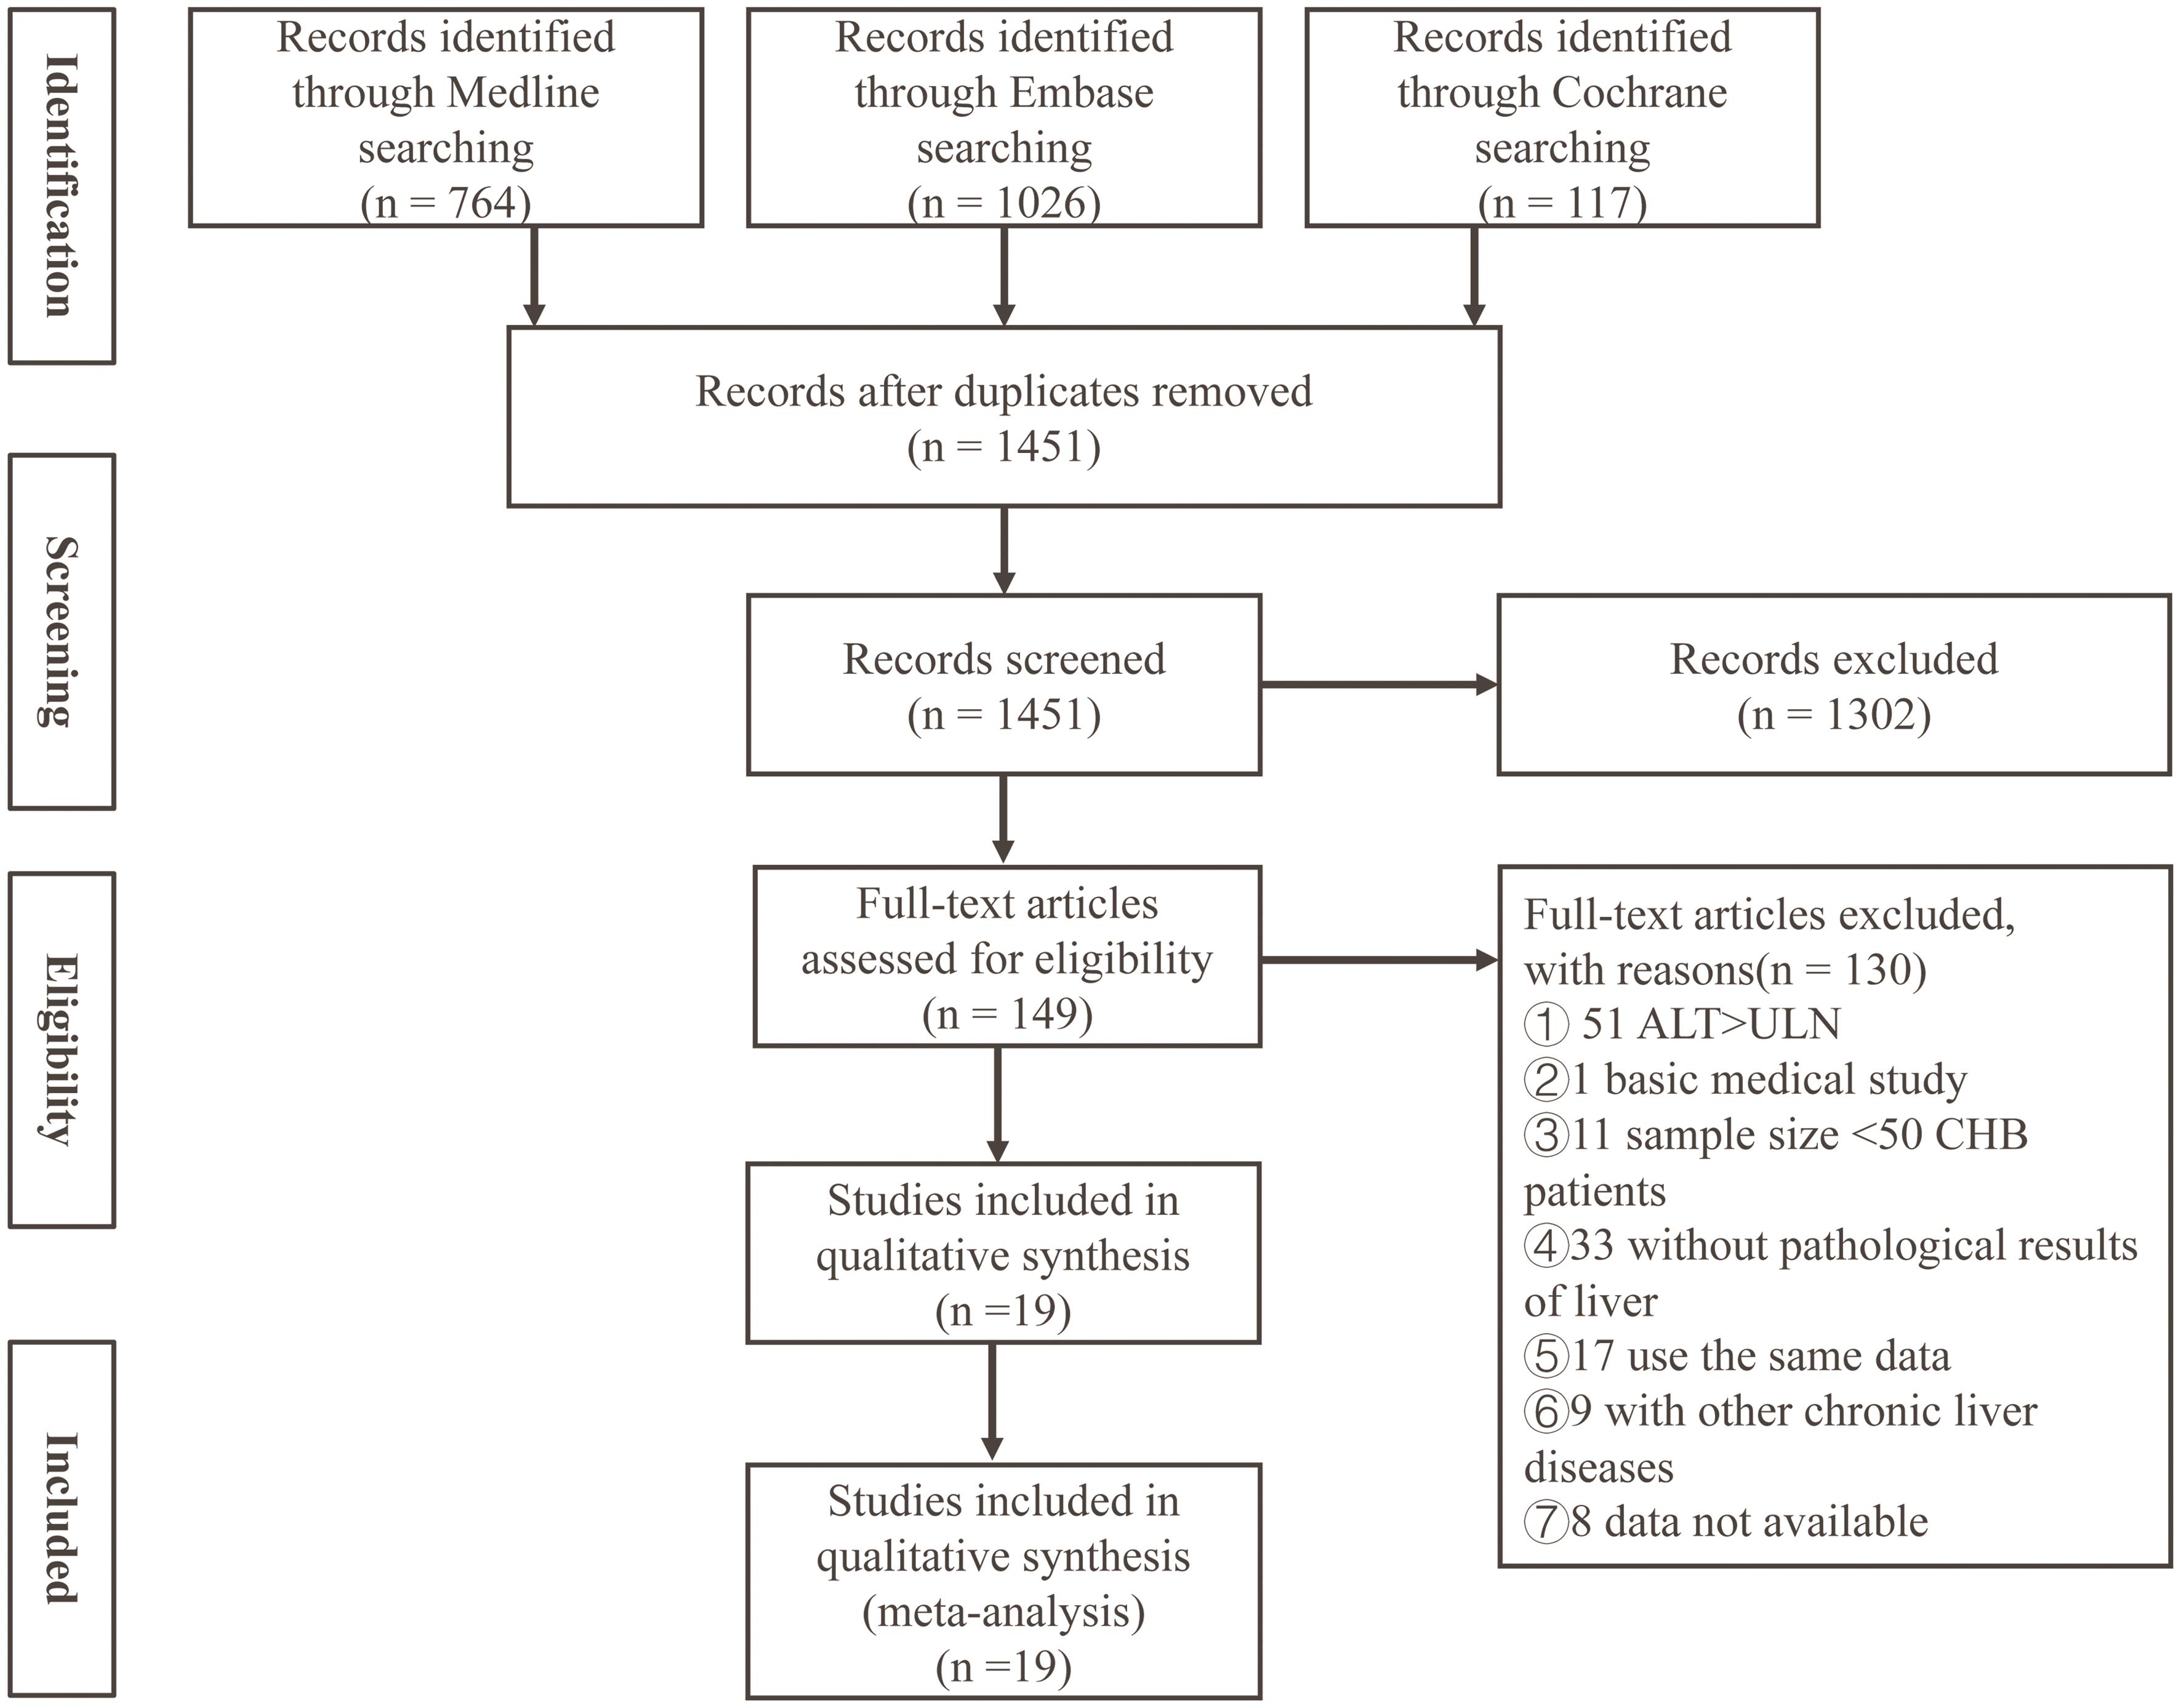 Flowchart for study selection in the meta-analysis.